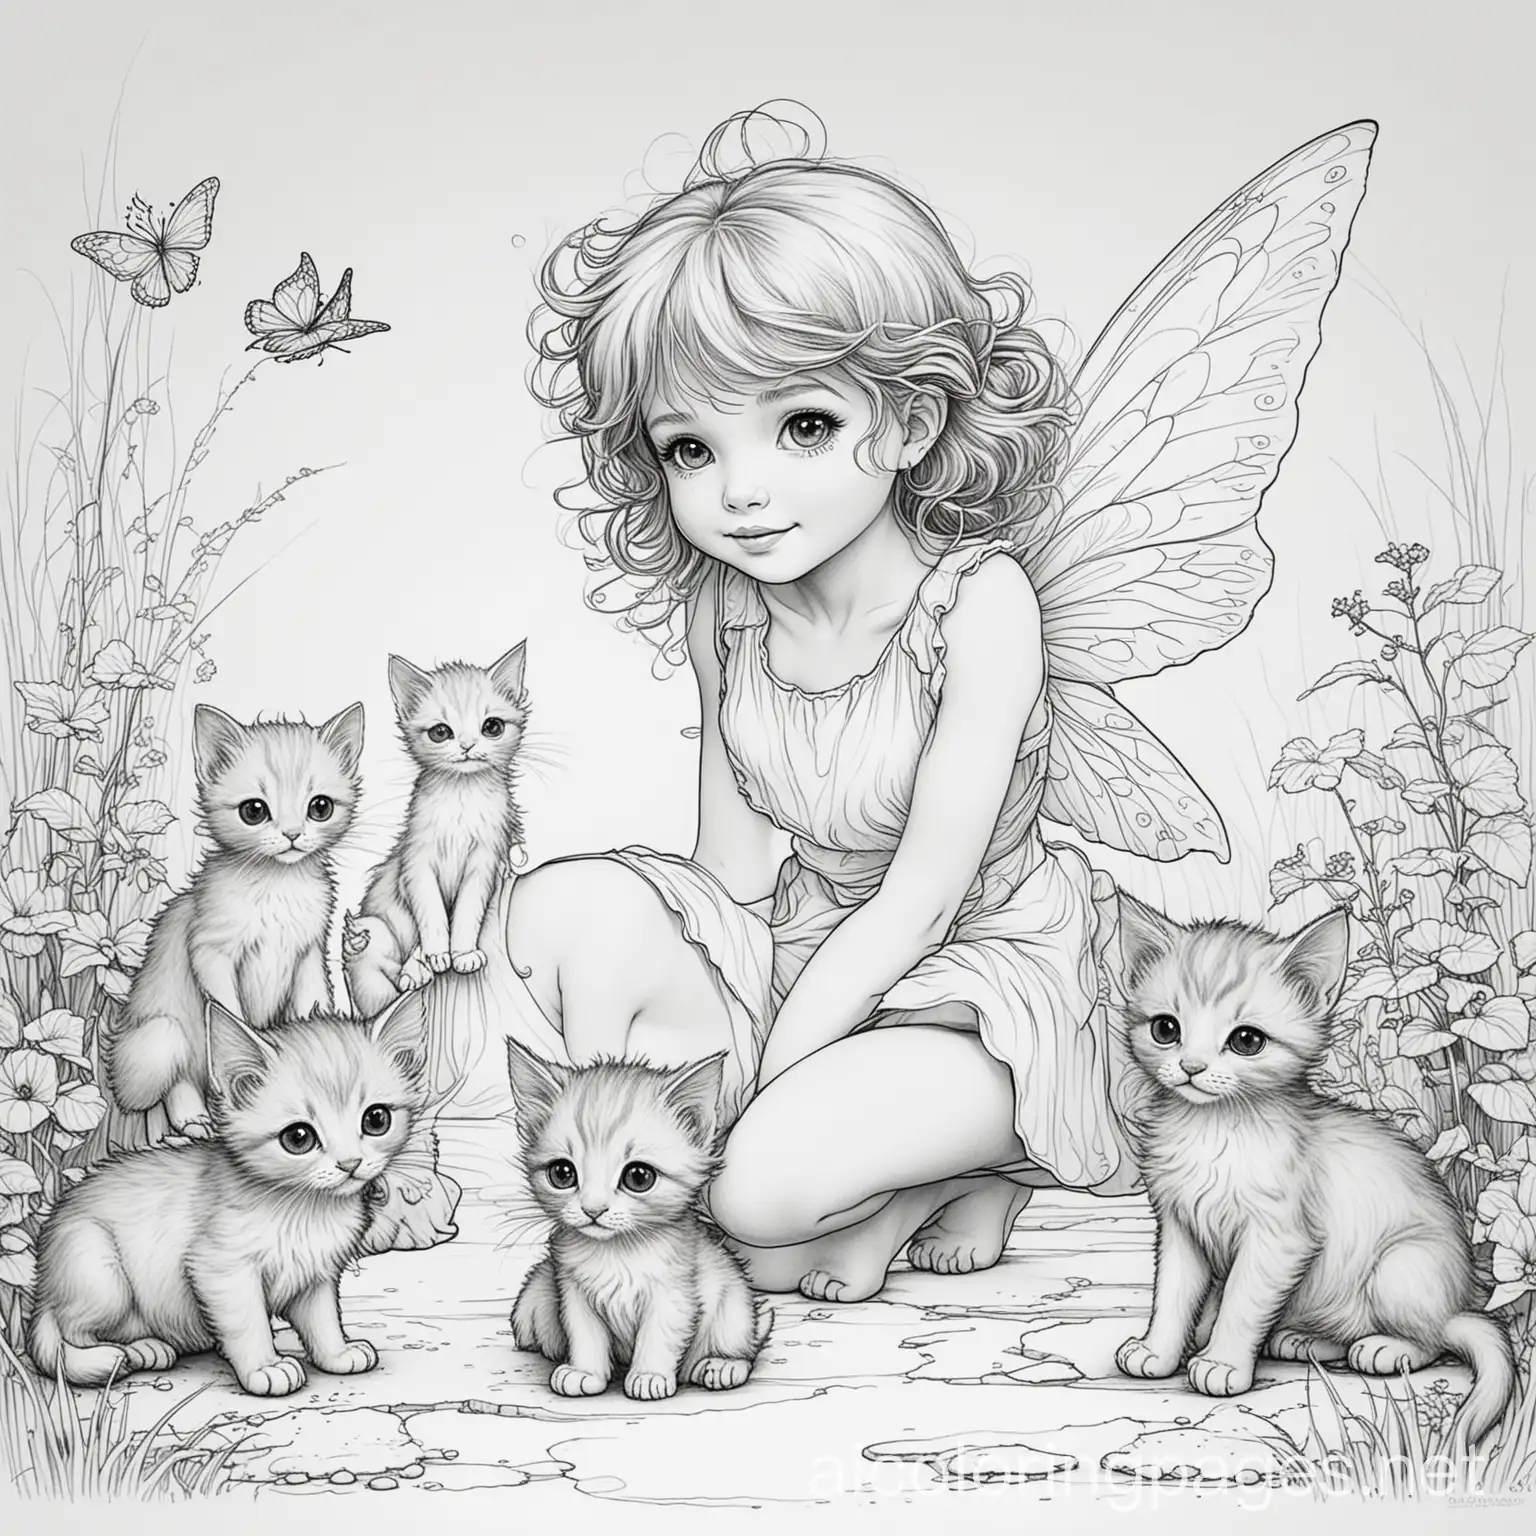 little barefoot fairy girl with messy hair playing outside with her kittens, Coloring Page, black and white, line art, white background, Simplicity, Ample White Space. The background of the coloring page is plain white to make it easy for young children to color within the lines. The outlines of all the subjects are easy to distinguish, making it simple for kids to color without too much difficulty